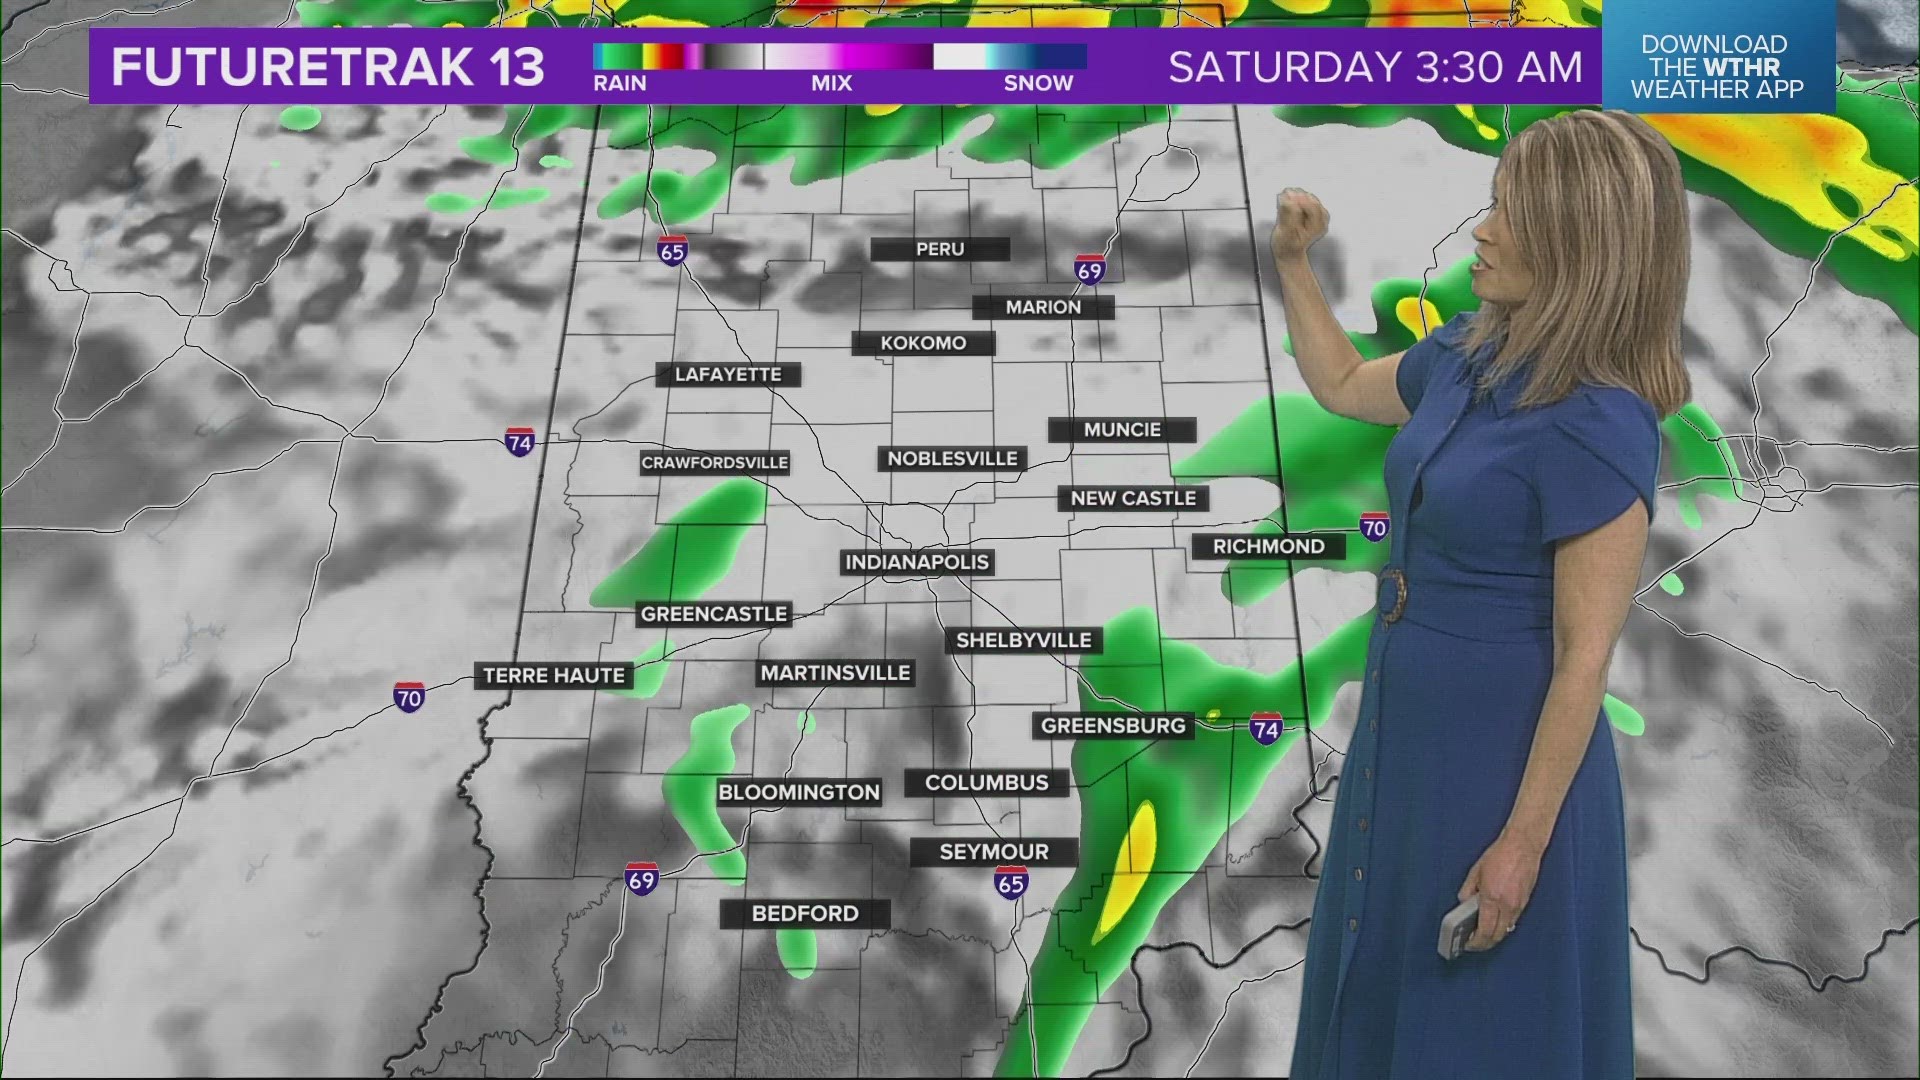 13News meteorologist Angela Buchman breaks down some scattered showers expected to hit central Indiana for Easter weekend.